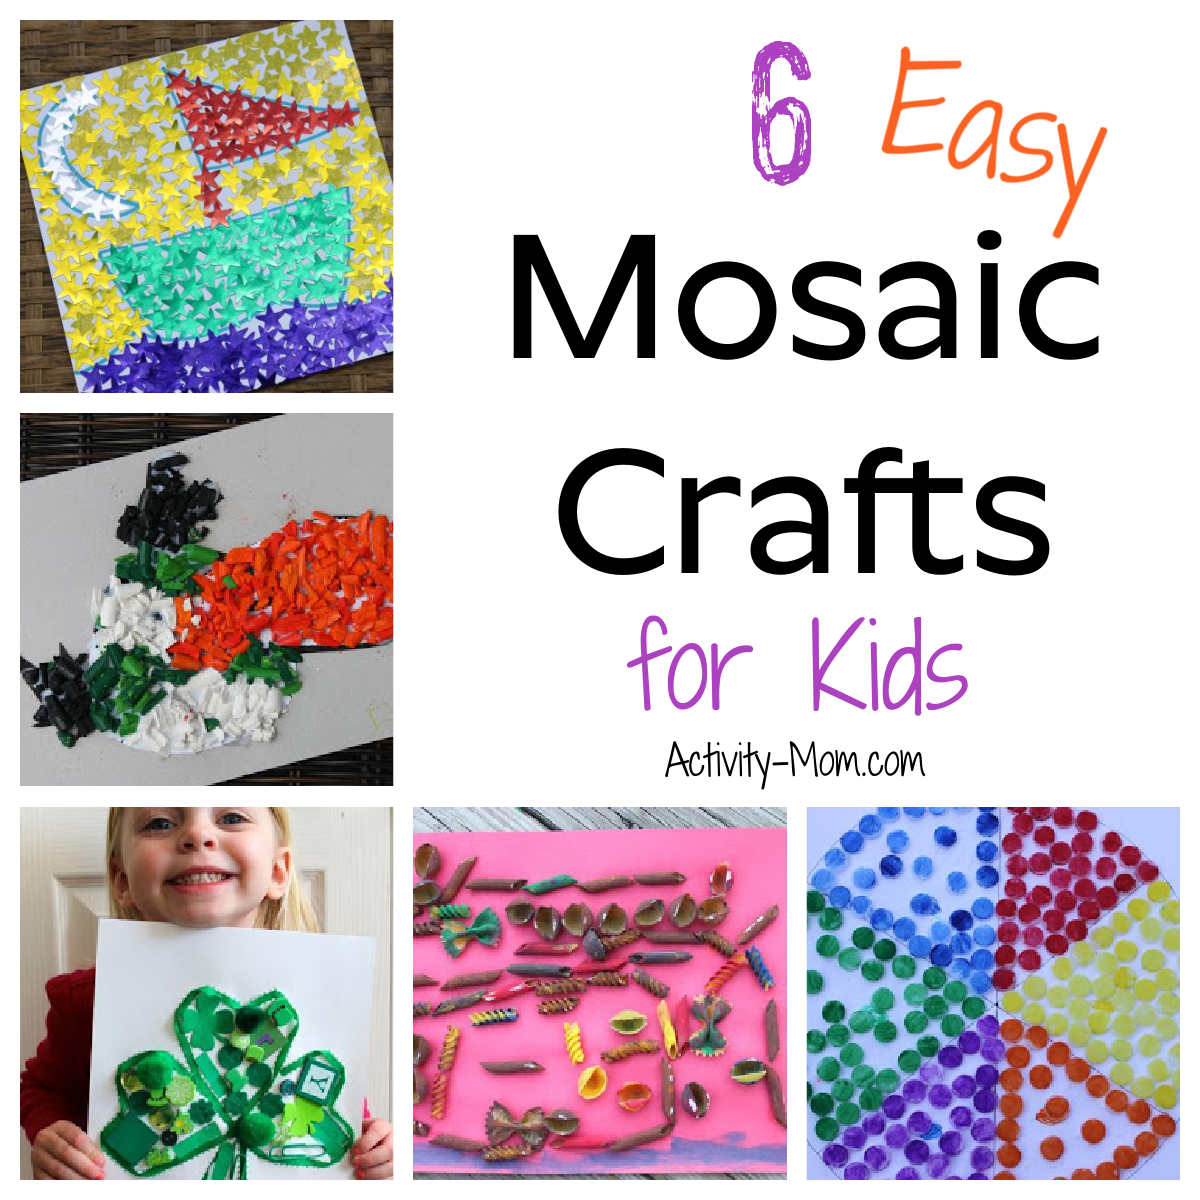 Easy mosaic crafts for kids